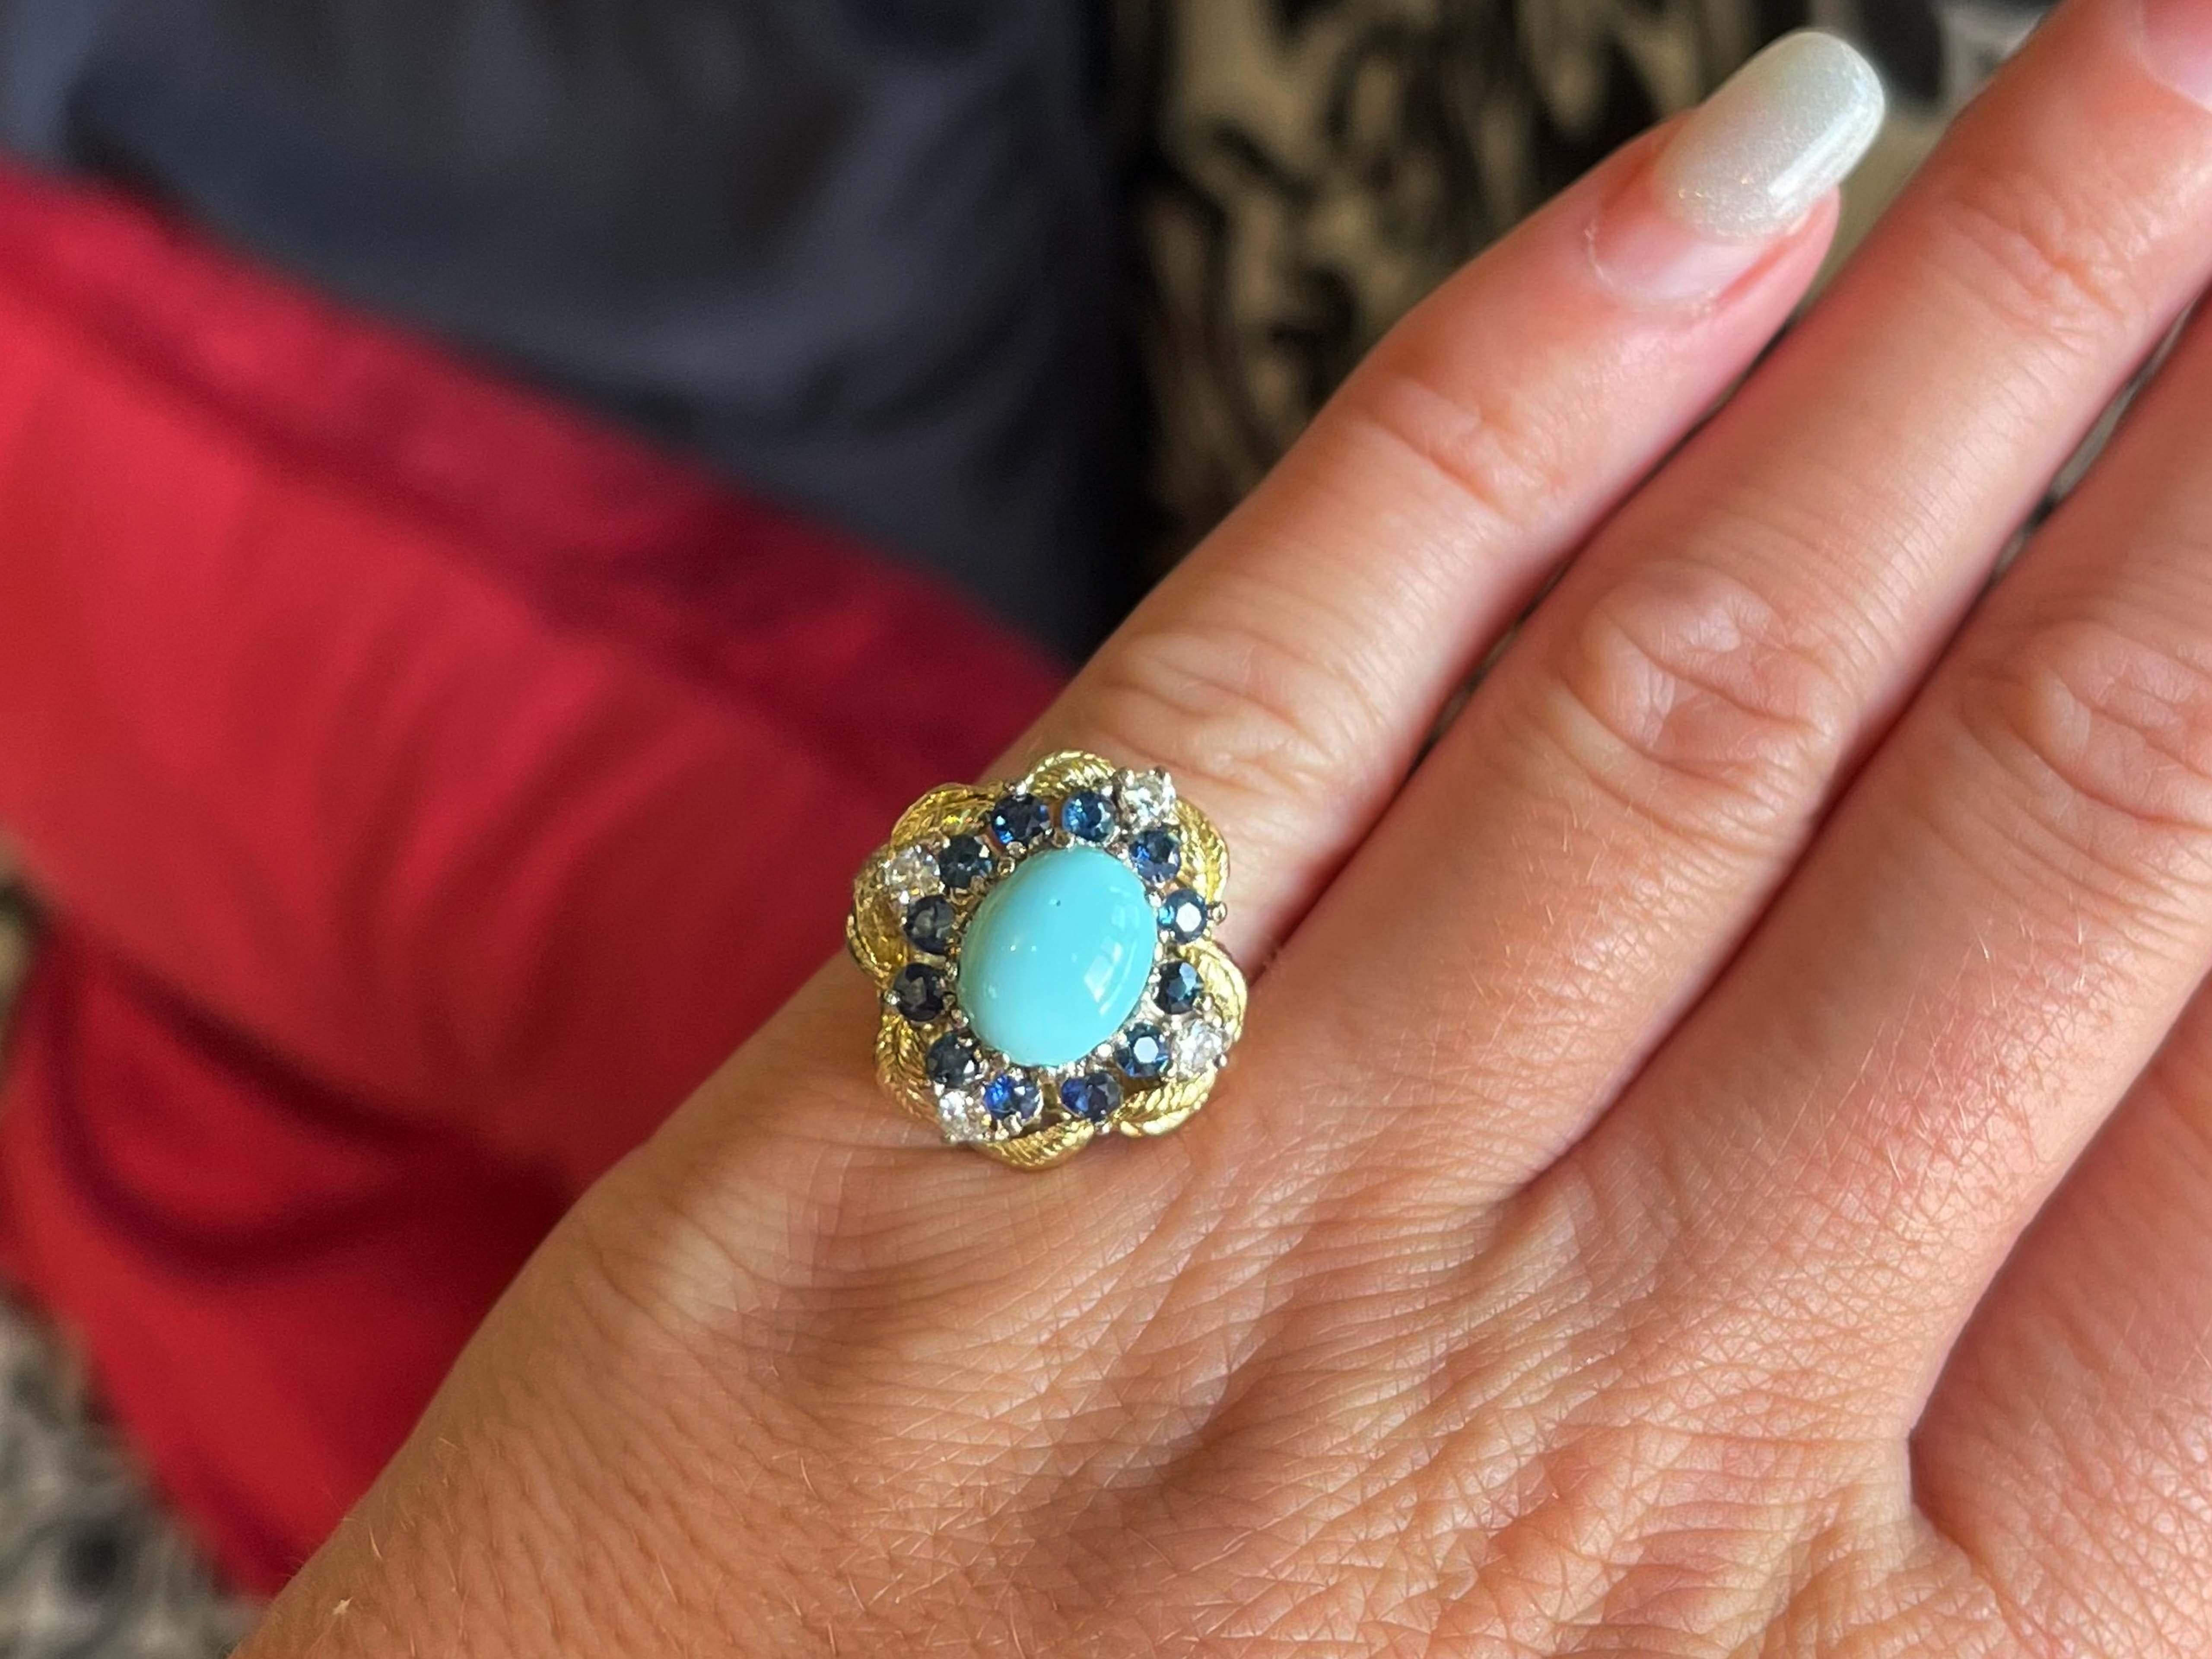 Specifications:

Metal: 18k Yellow Gold
​​​​Ring Size: 5

Center Gemstone: Blue Turquoise
​
​Turquoise Measurements: ~ 9.95 mm x 7.95 mm x 4.20 mm 
​
​Turquoise Carat Weight: ~2.5 carats
​
​Sapphire Count: 12 round sapphires
​
​Sapphire Carat